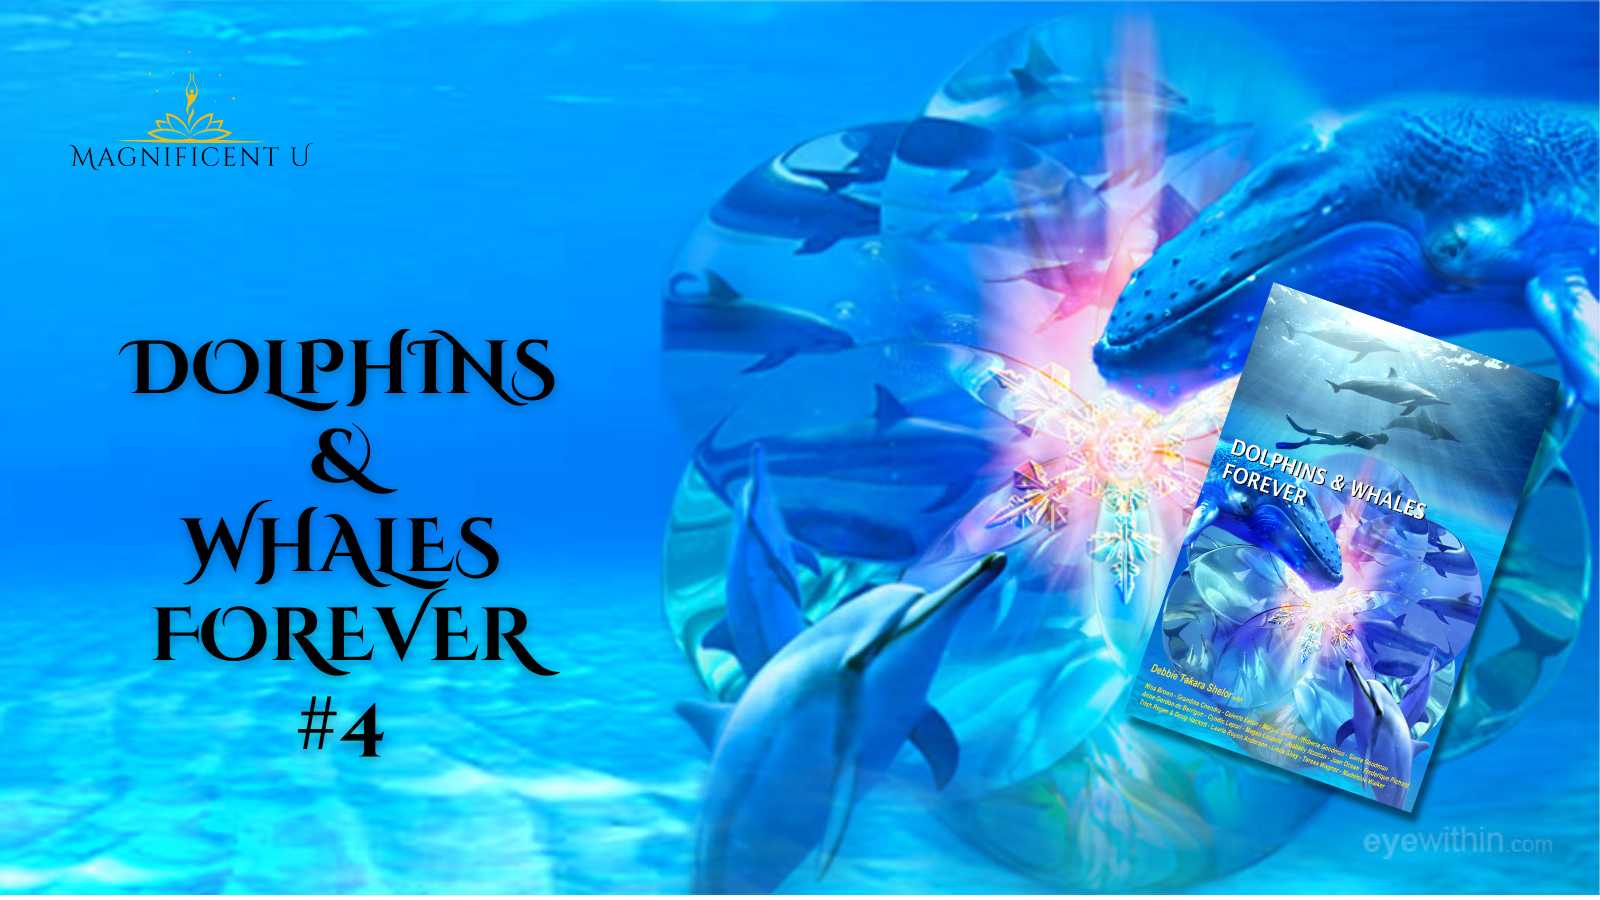 Bestselling book tour Dolphins & Whales Forever Roberta Goodman Takara Shelor